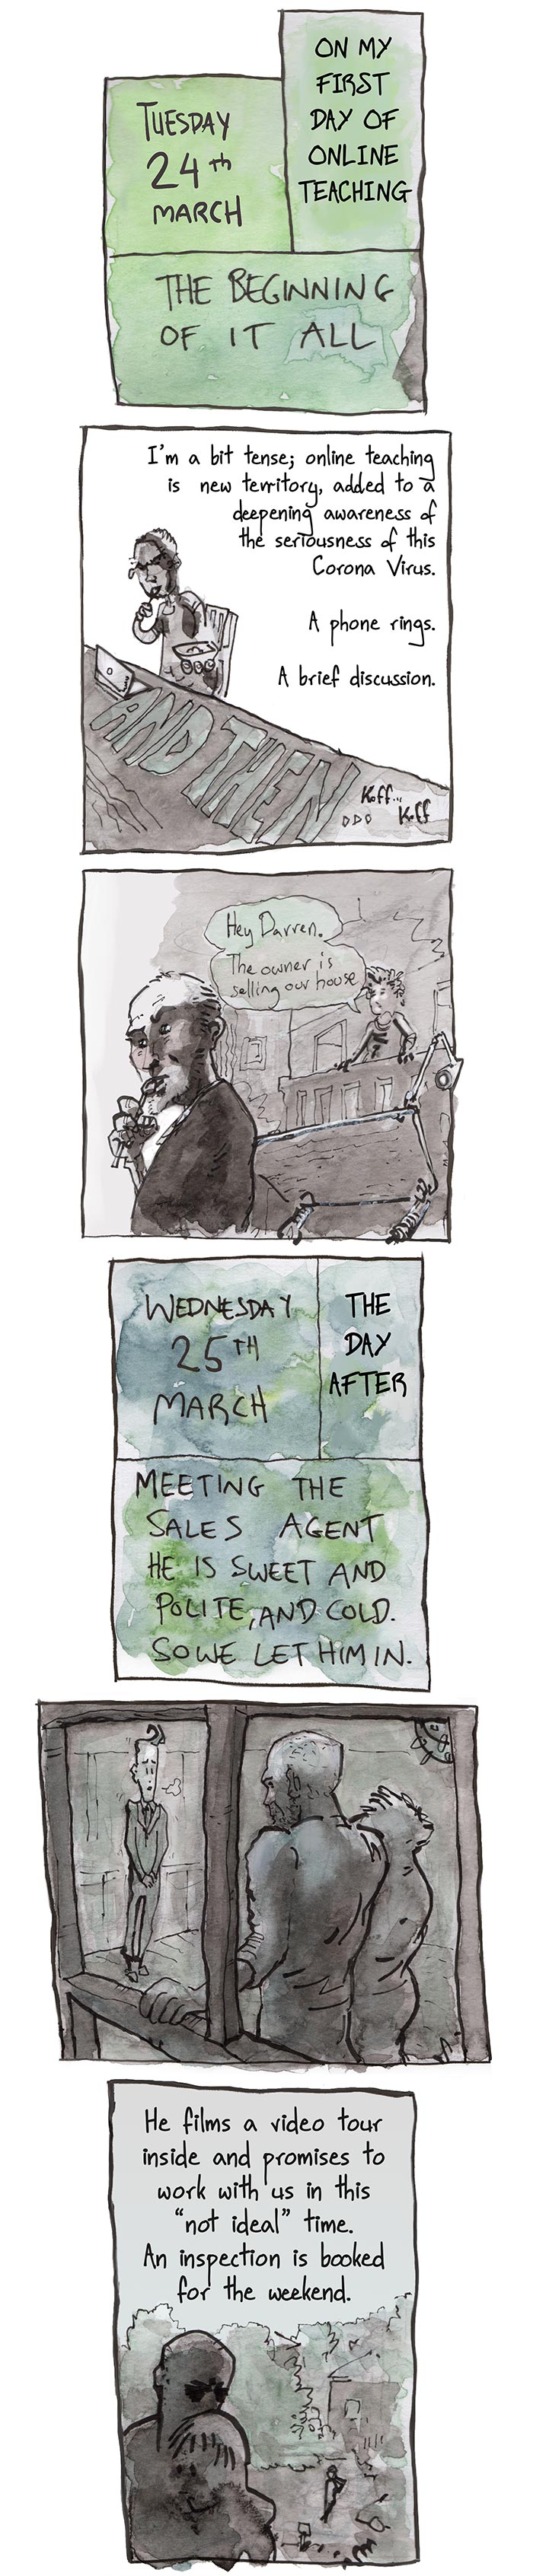 The first sketchy watercolour comics telling the story of Darren's rental crisis. A transcript is available at the end.